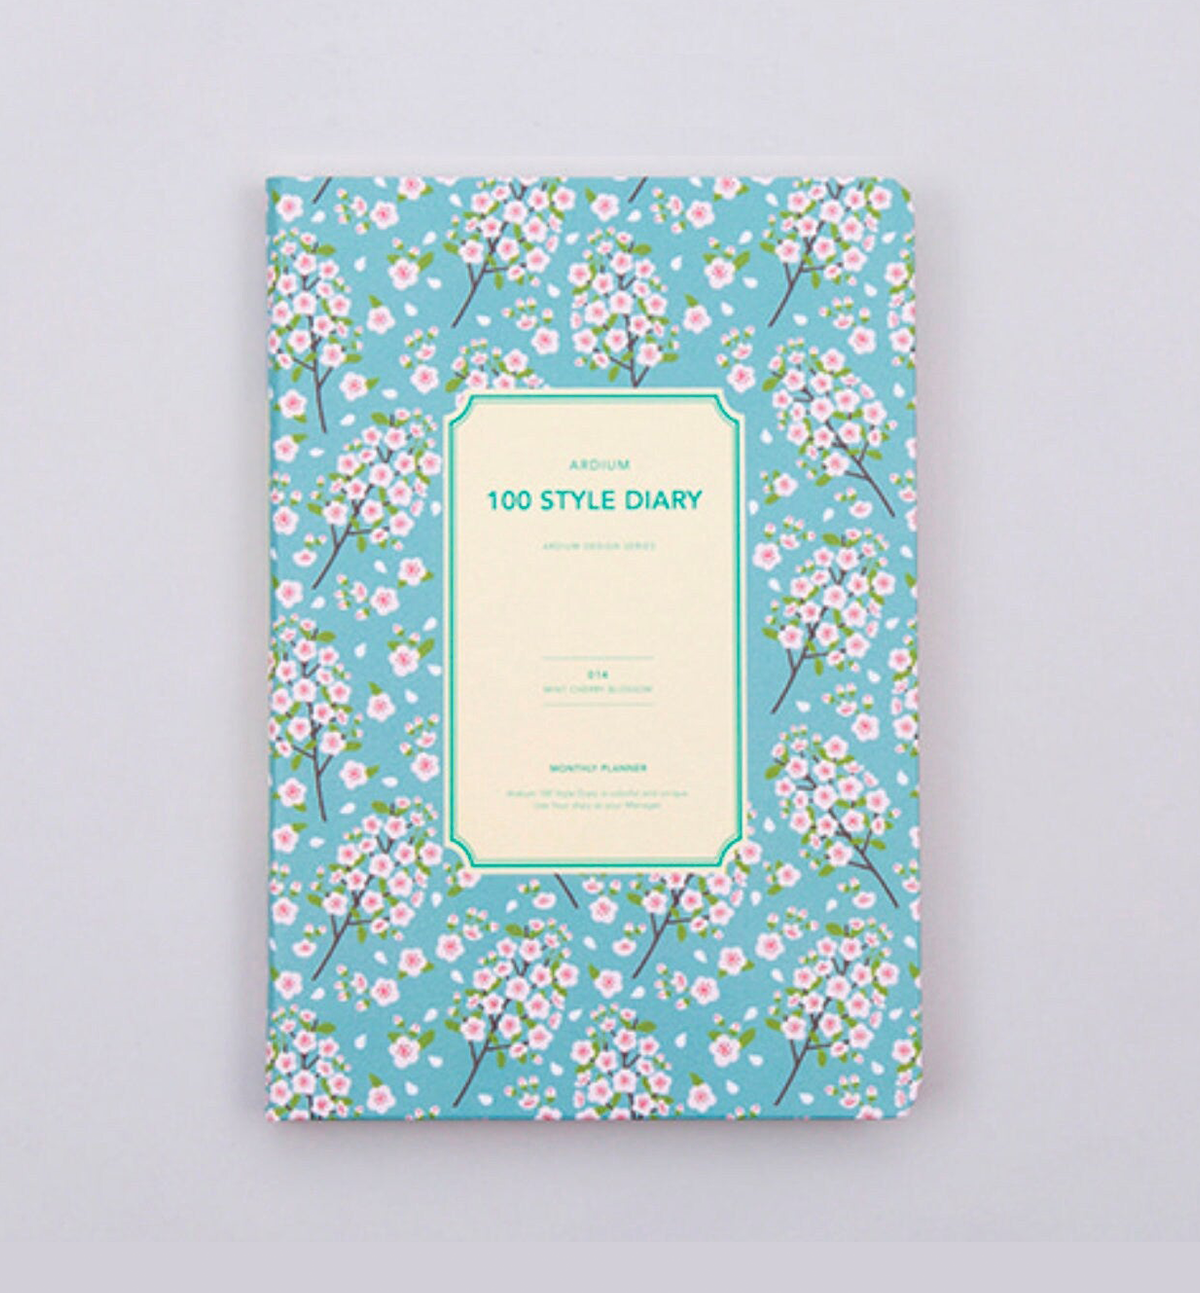 100 Style Diary [Mint Cherry Blossom]